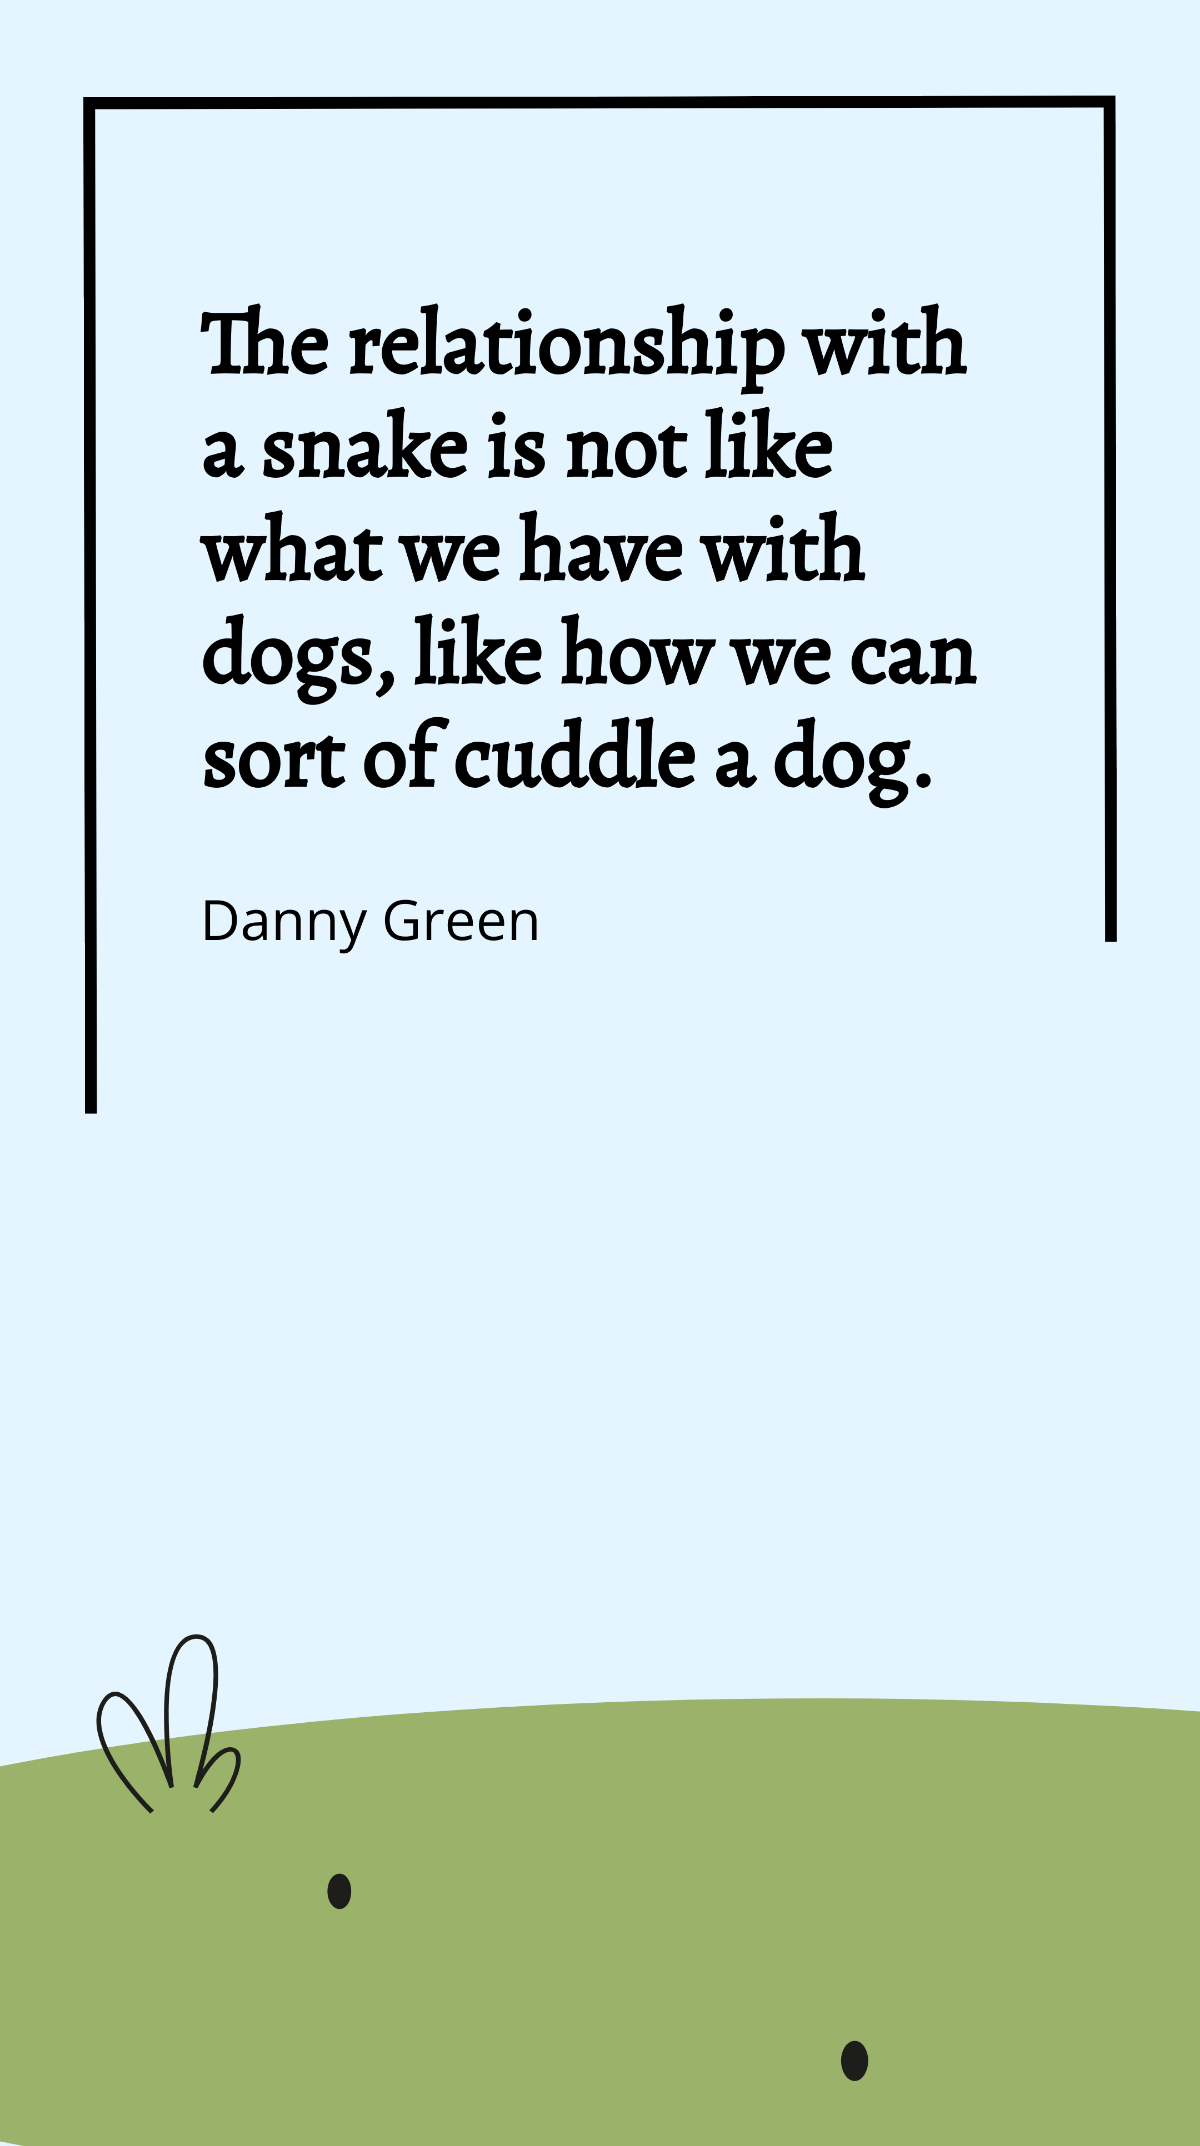 Danny Green - The relationship with a snake is not like what we have with dogs, like how we can sort of cuddle a dog. Template